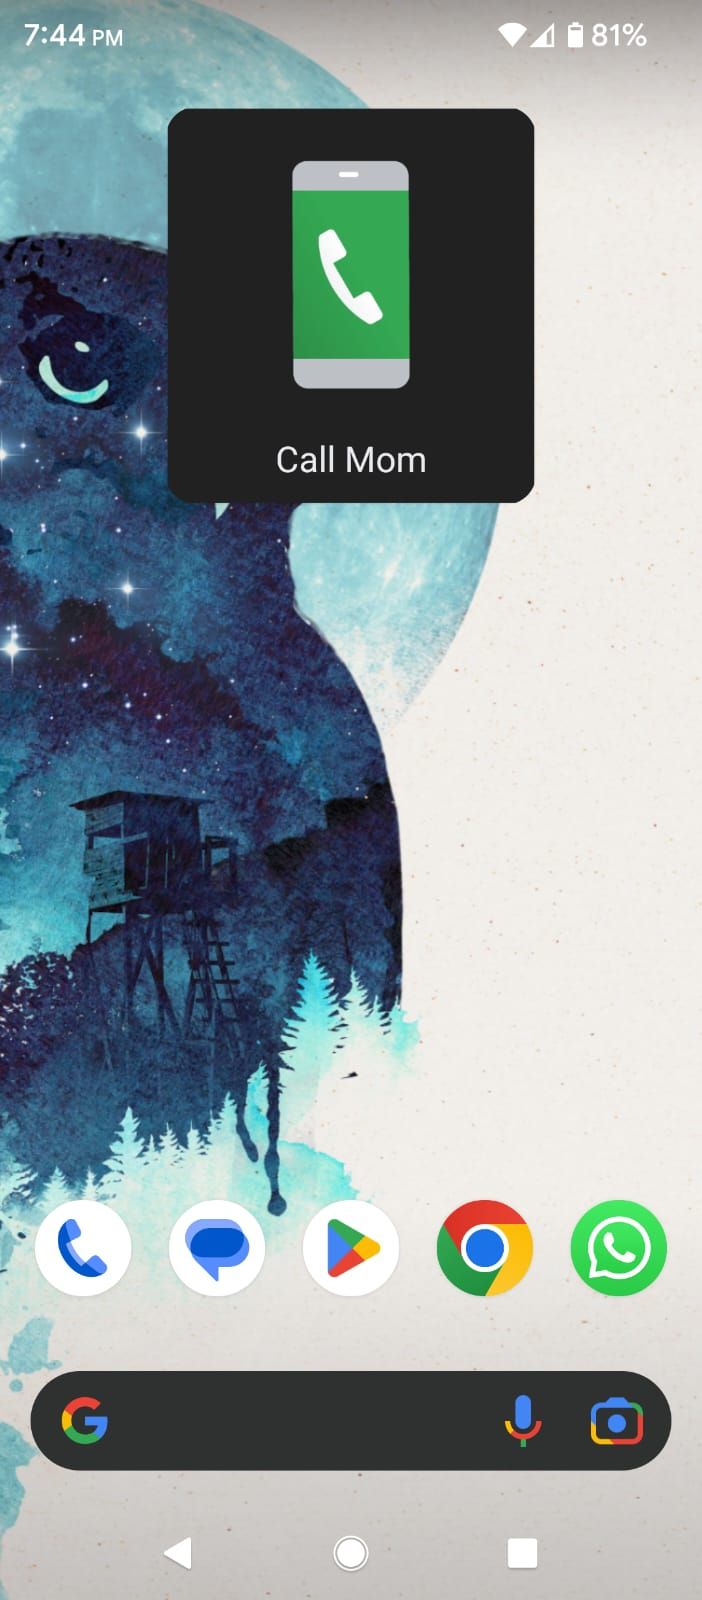 Call Mom Shortcut Button Created Using Action Blocks